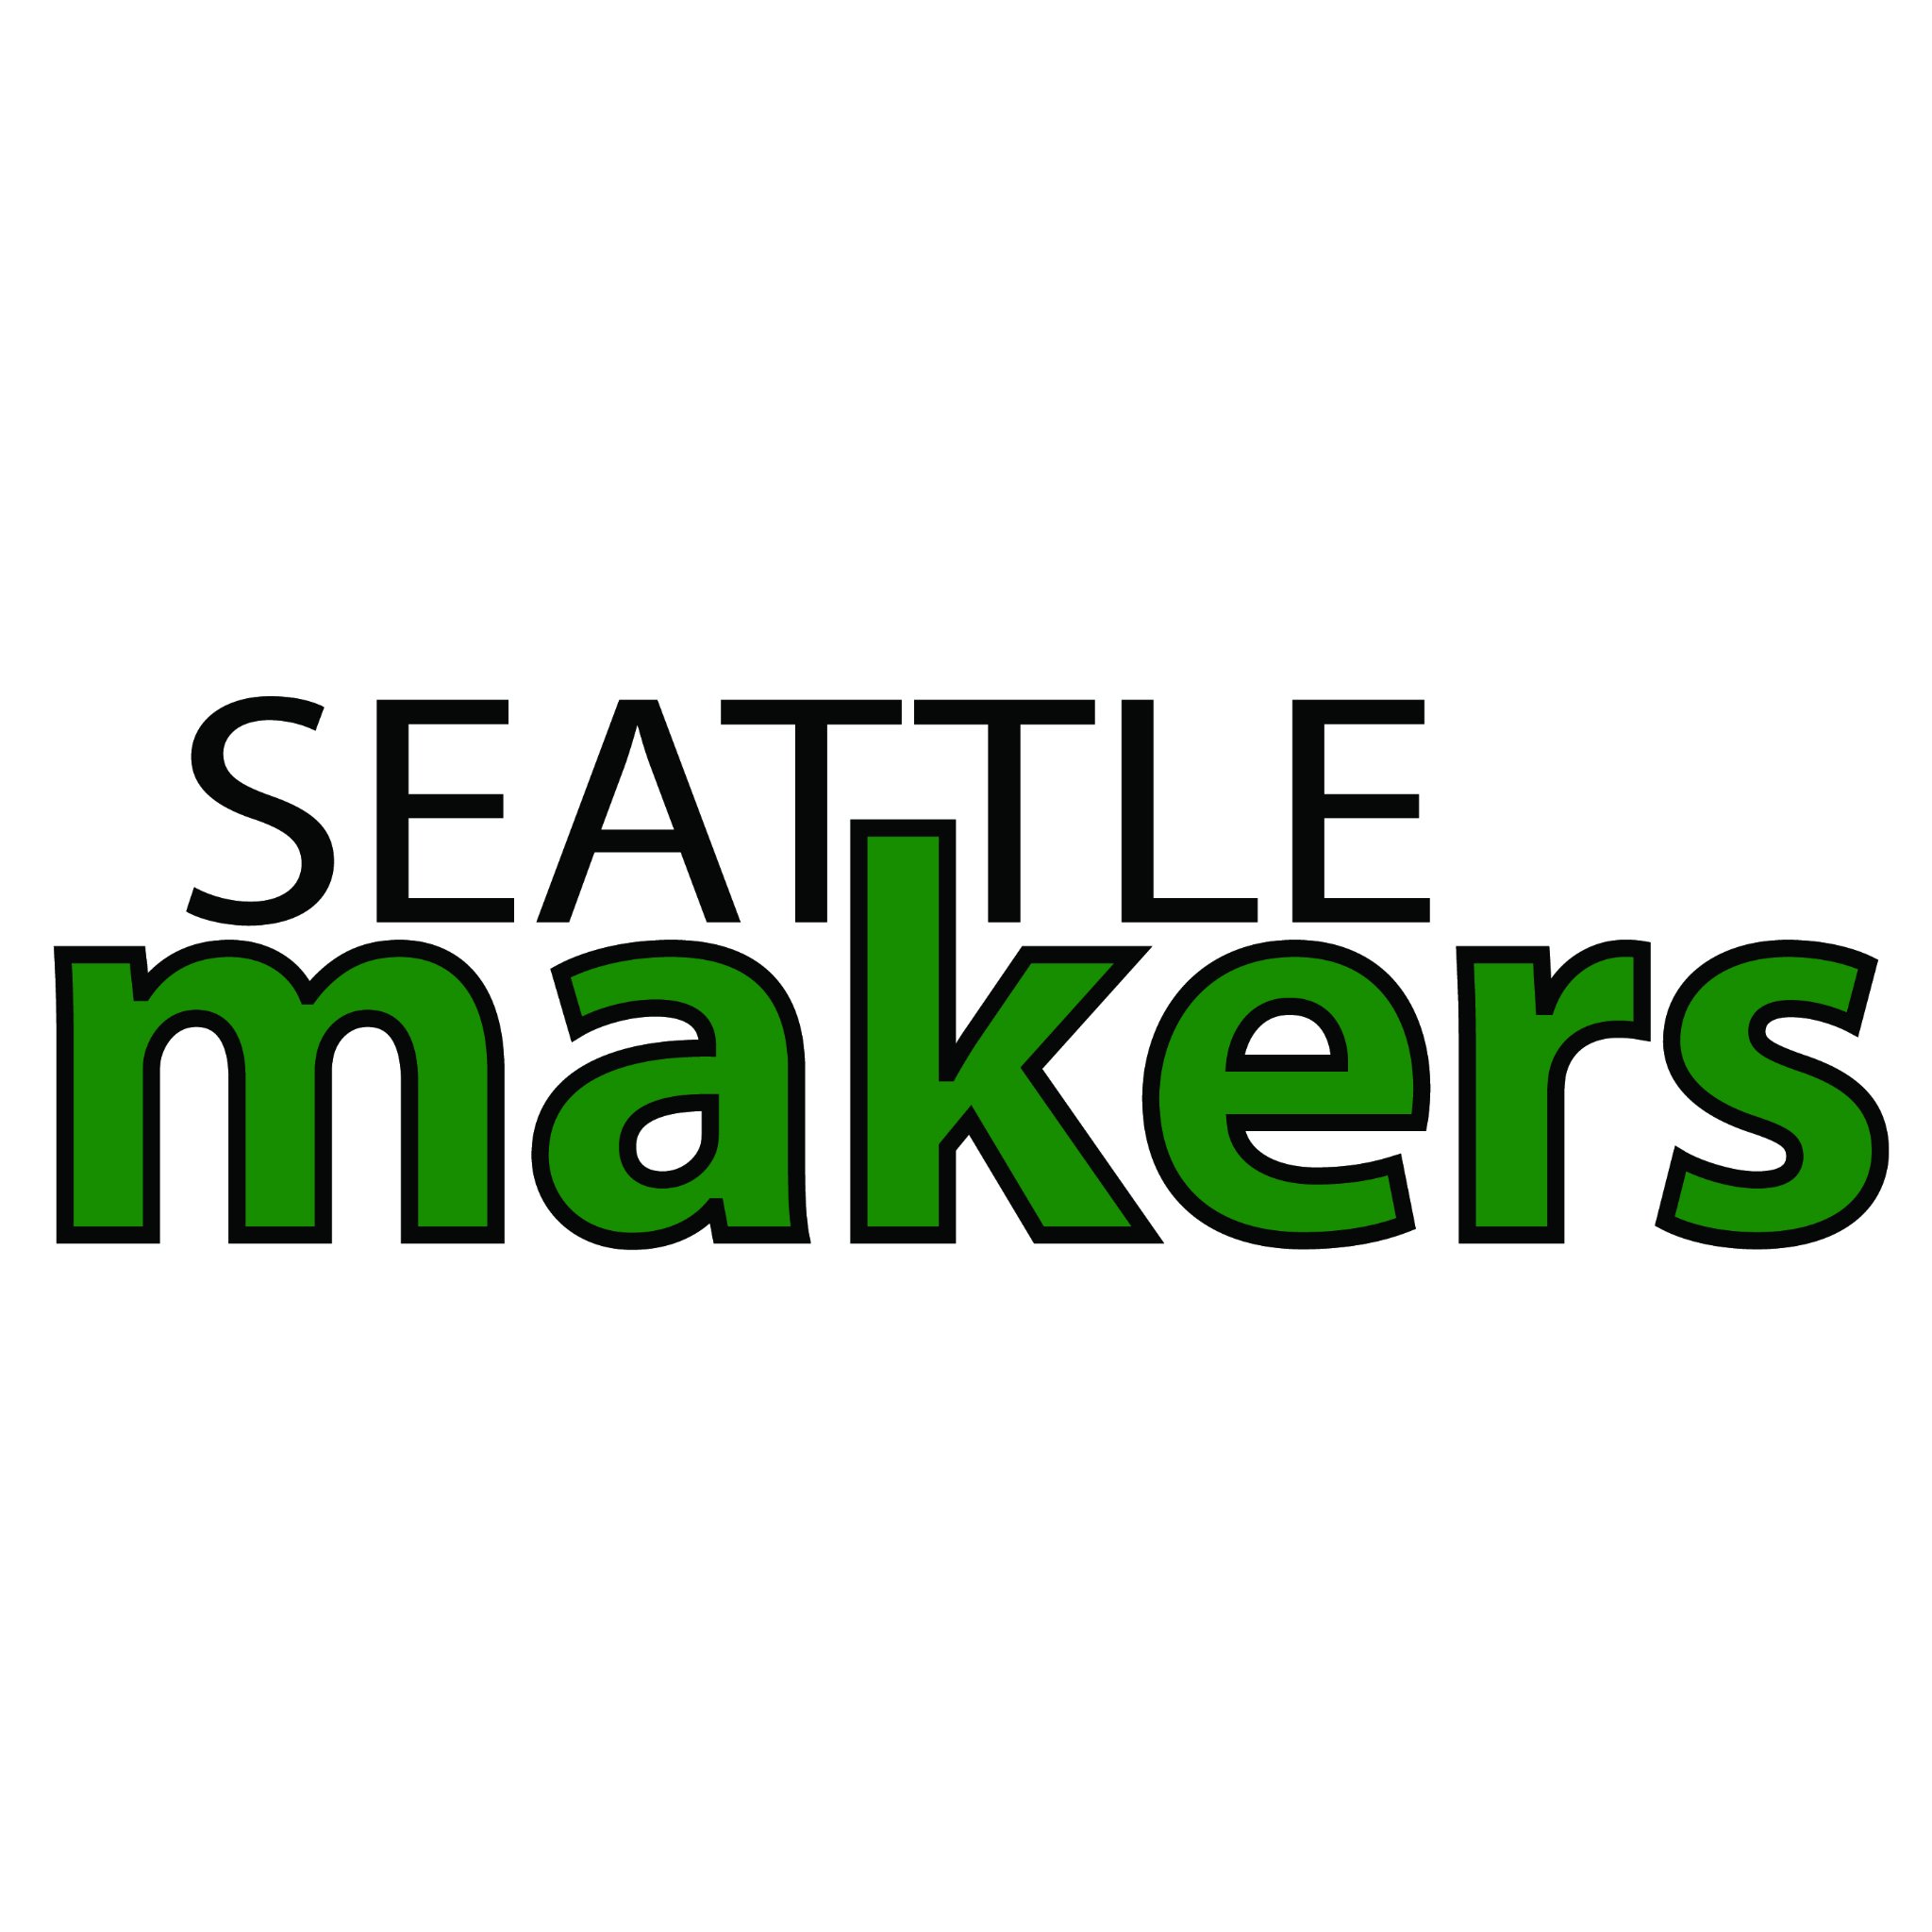 Seattle Makers